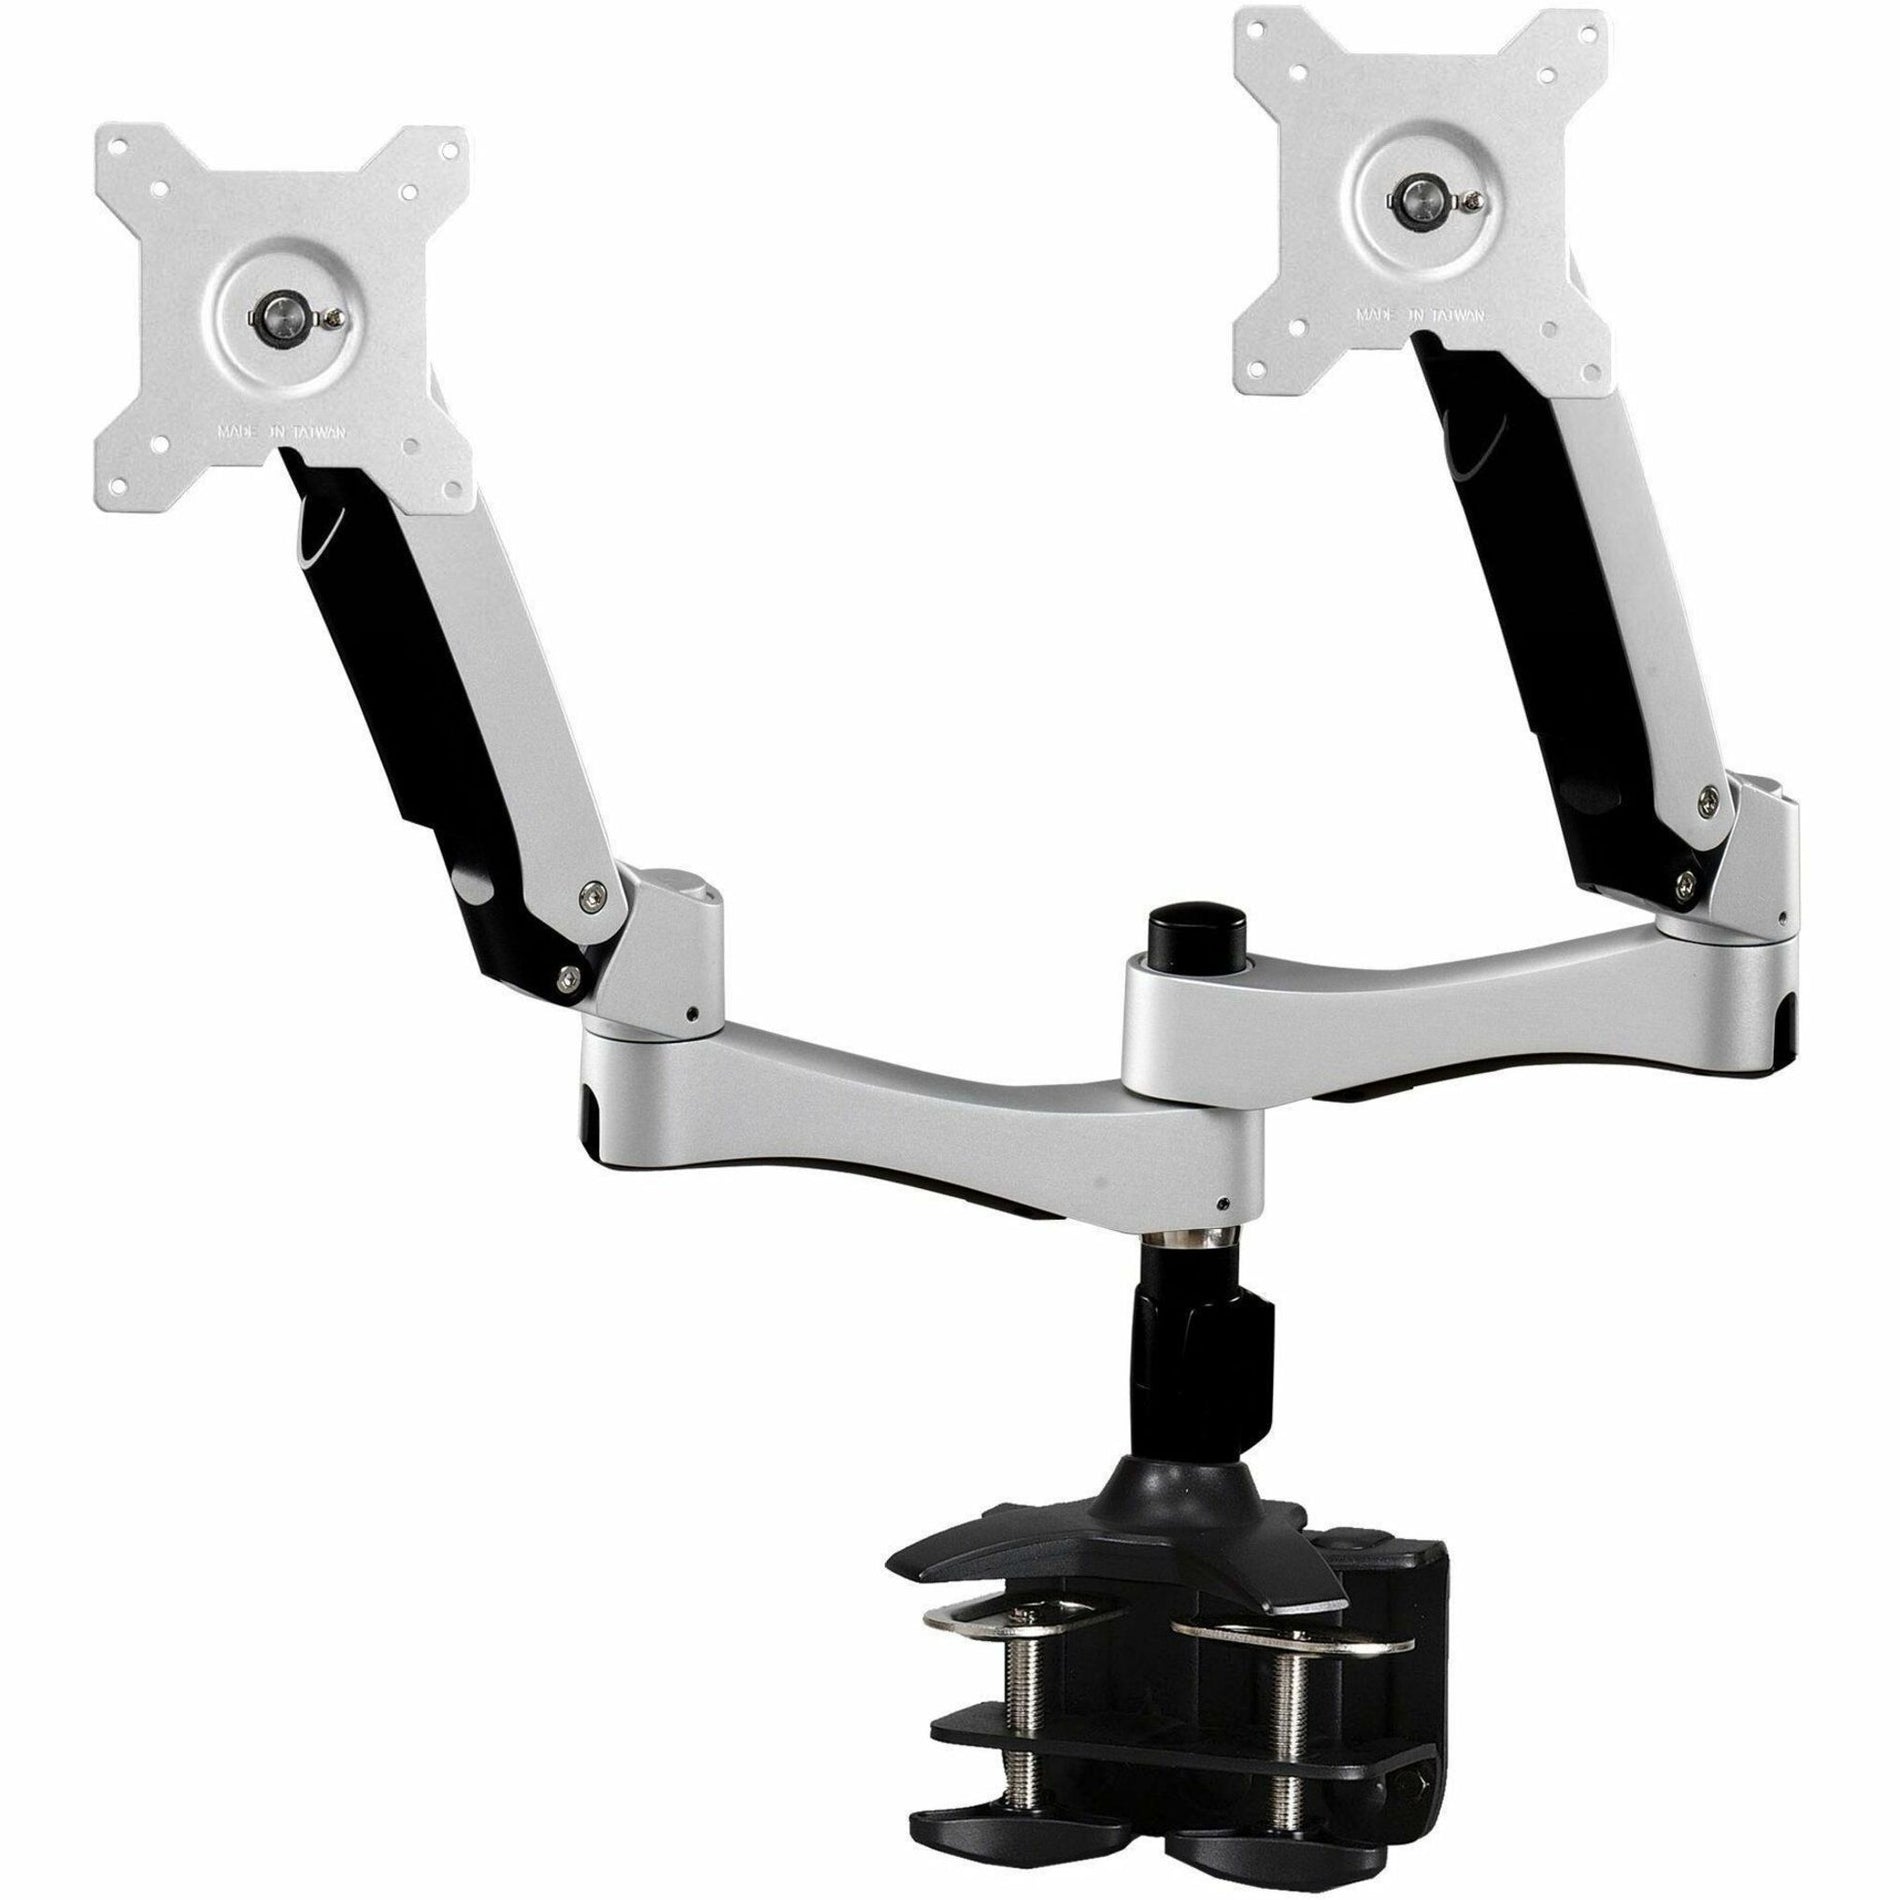 Amer Mounts AMR2AC Dual Articulating Monitor Arm. Supports up to 26", 22lbs and VESA, Cable Management, Smart Torque Adjustment